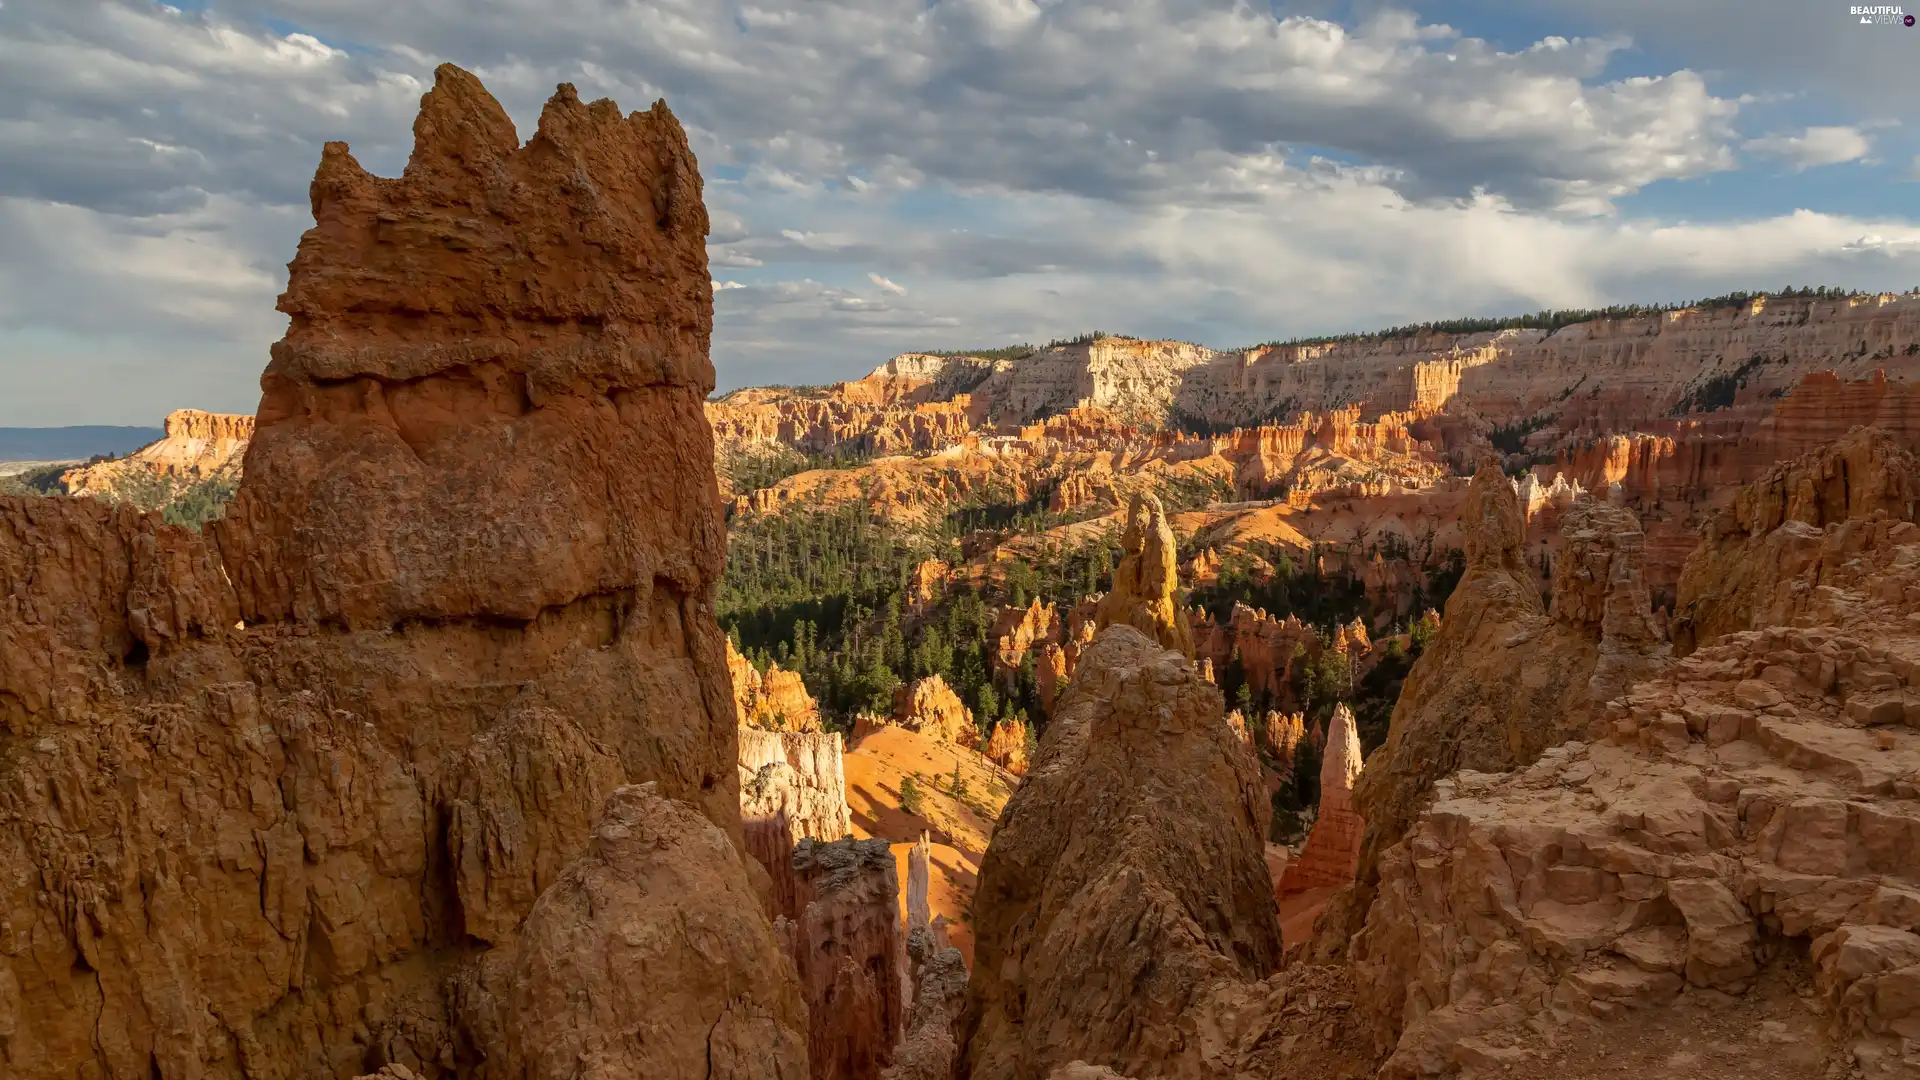 Utah State, The United States, rocks, canyon, Bryce Canyon National Park